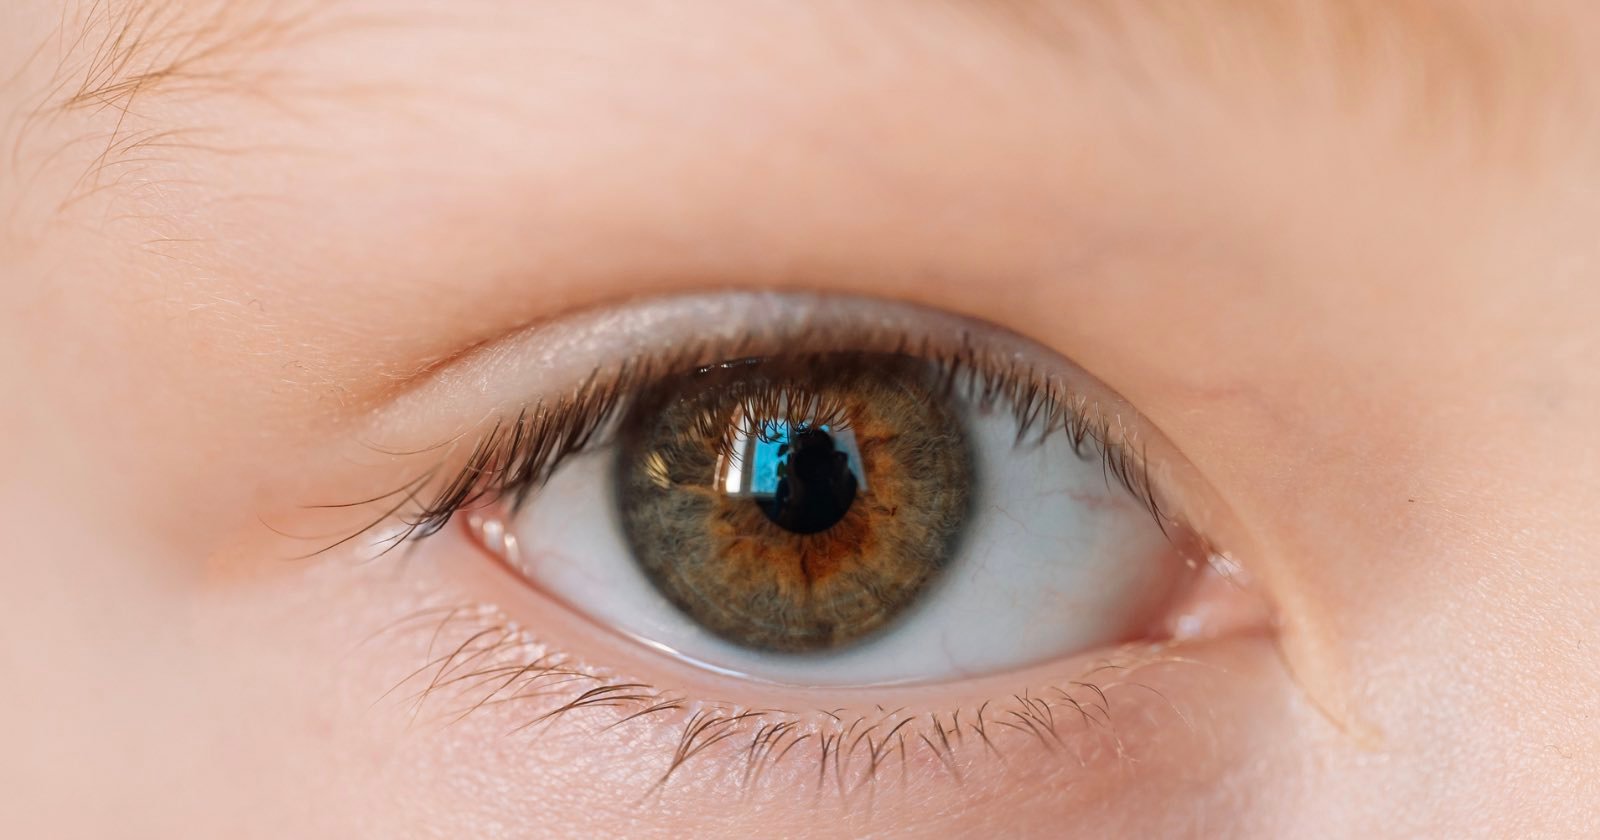  can diagnose childhood autism from eye photos 